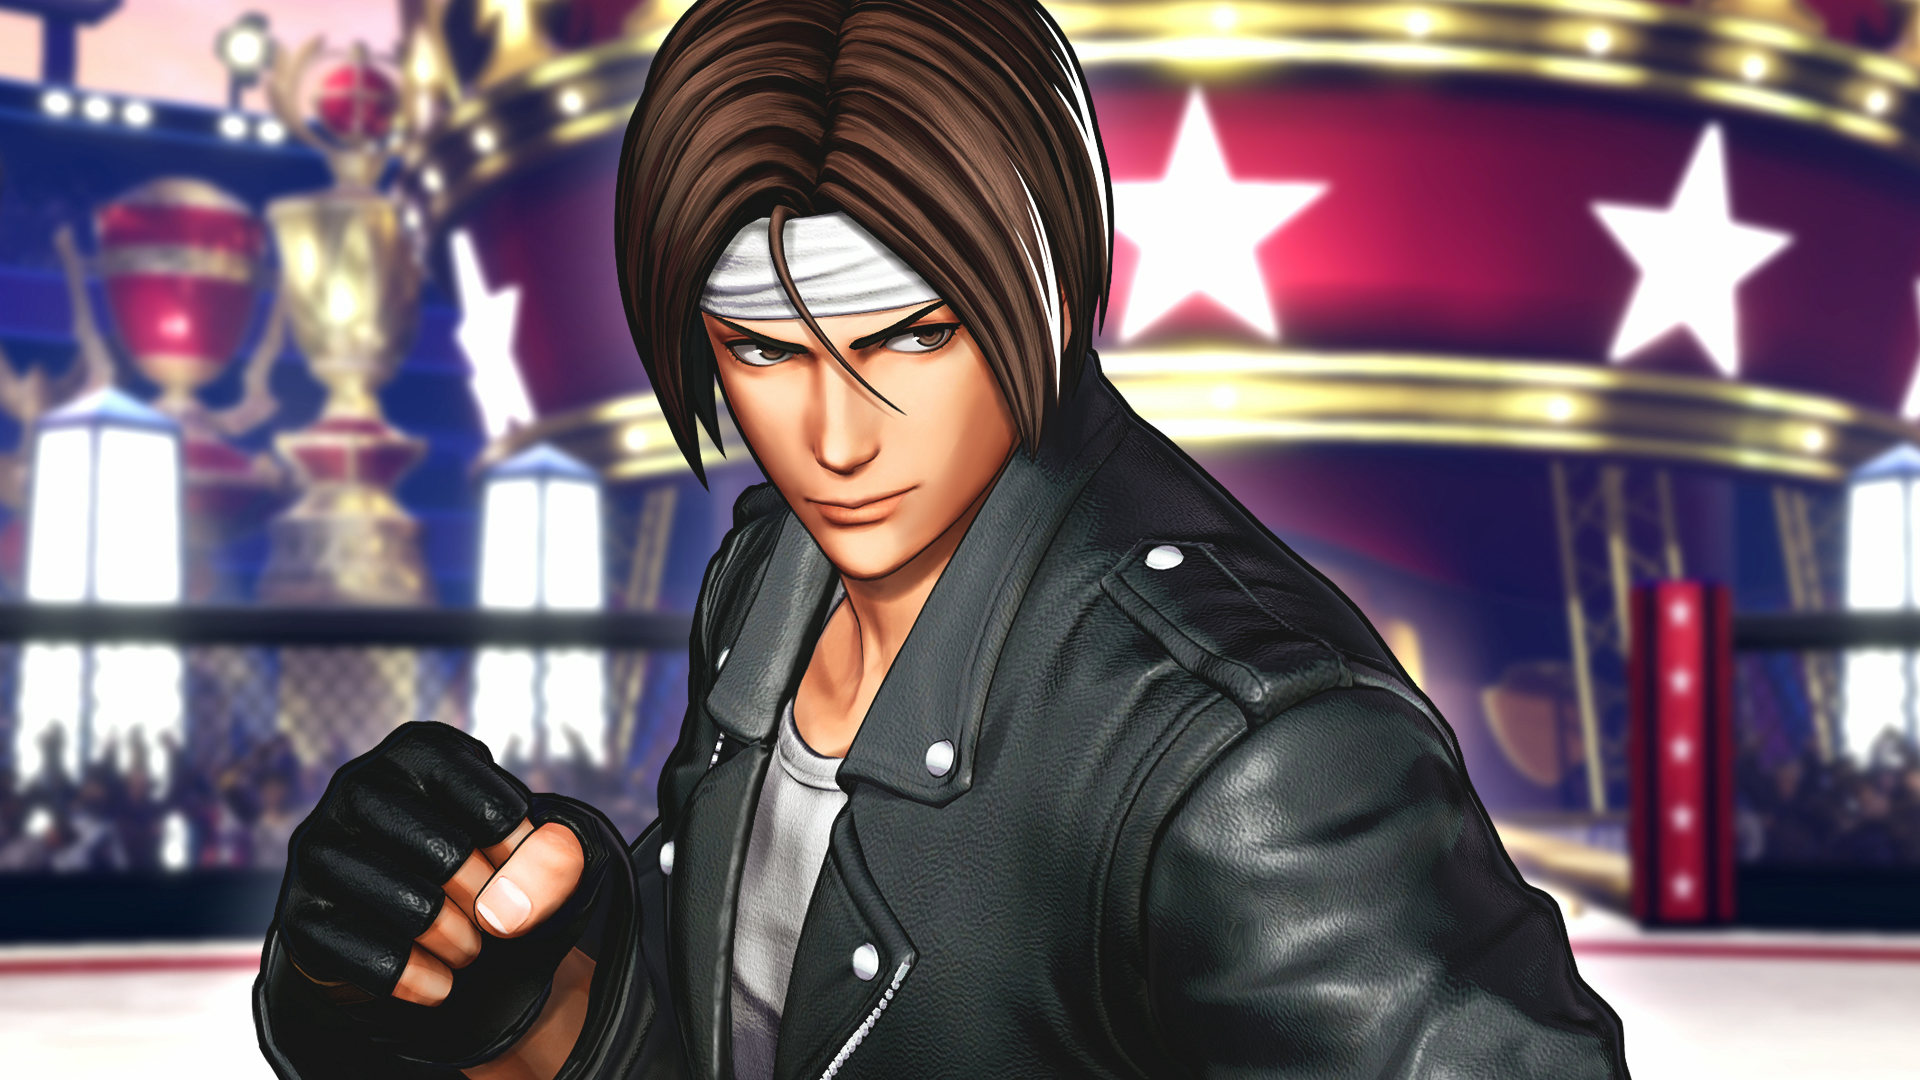 the king of fighters xv, video game, kyo kusanagi